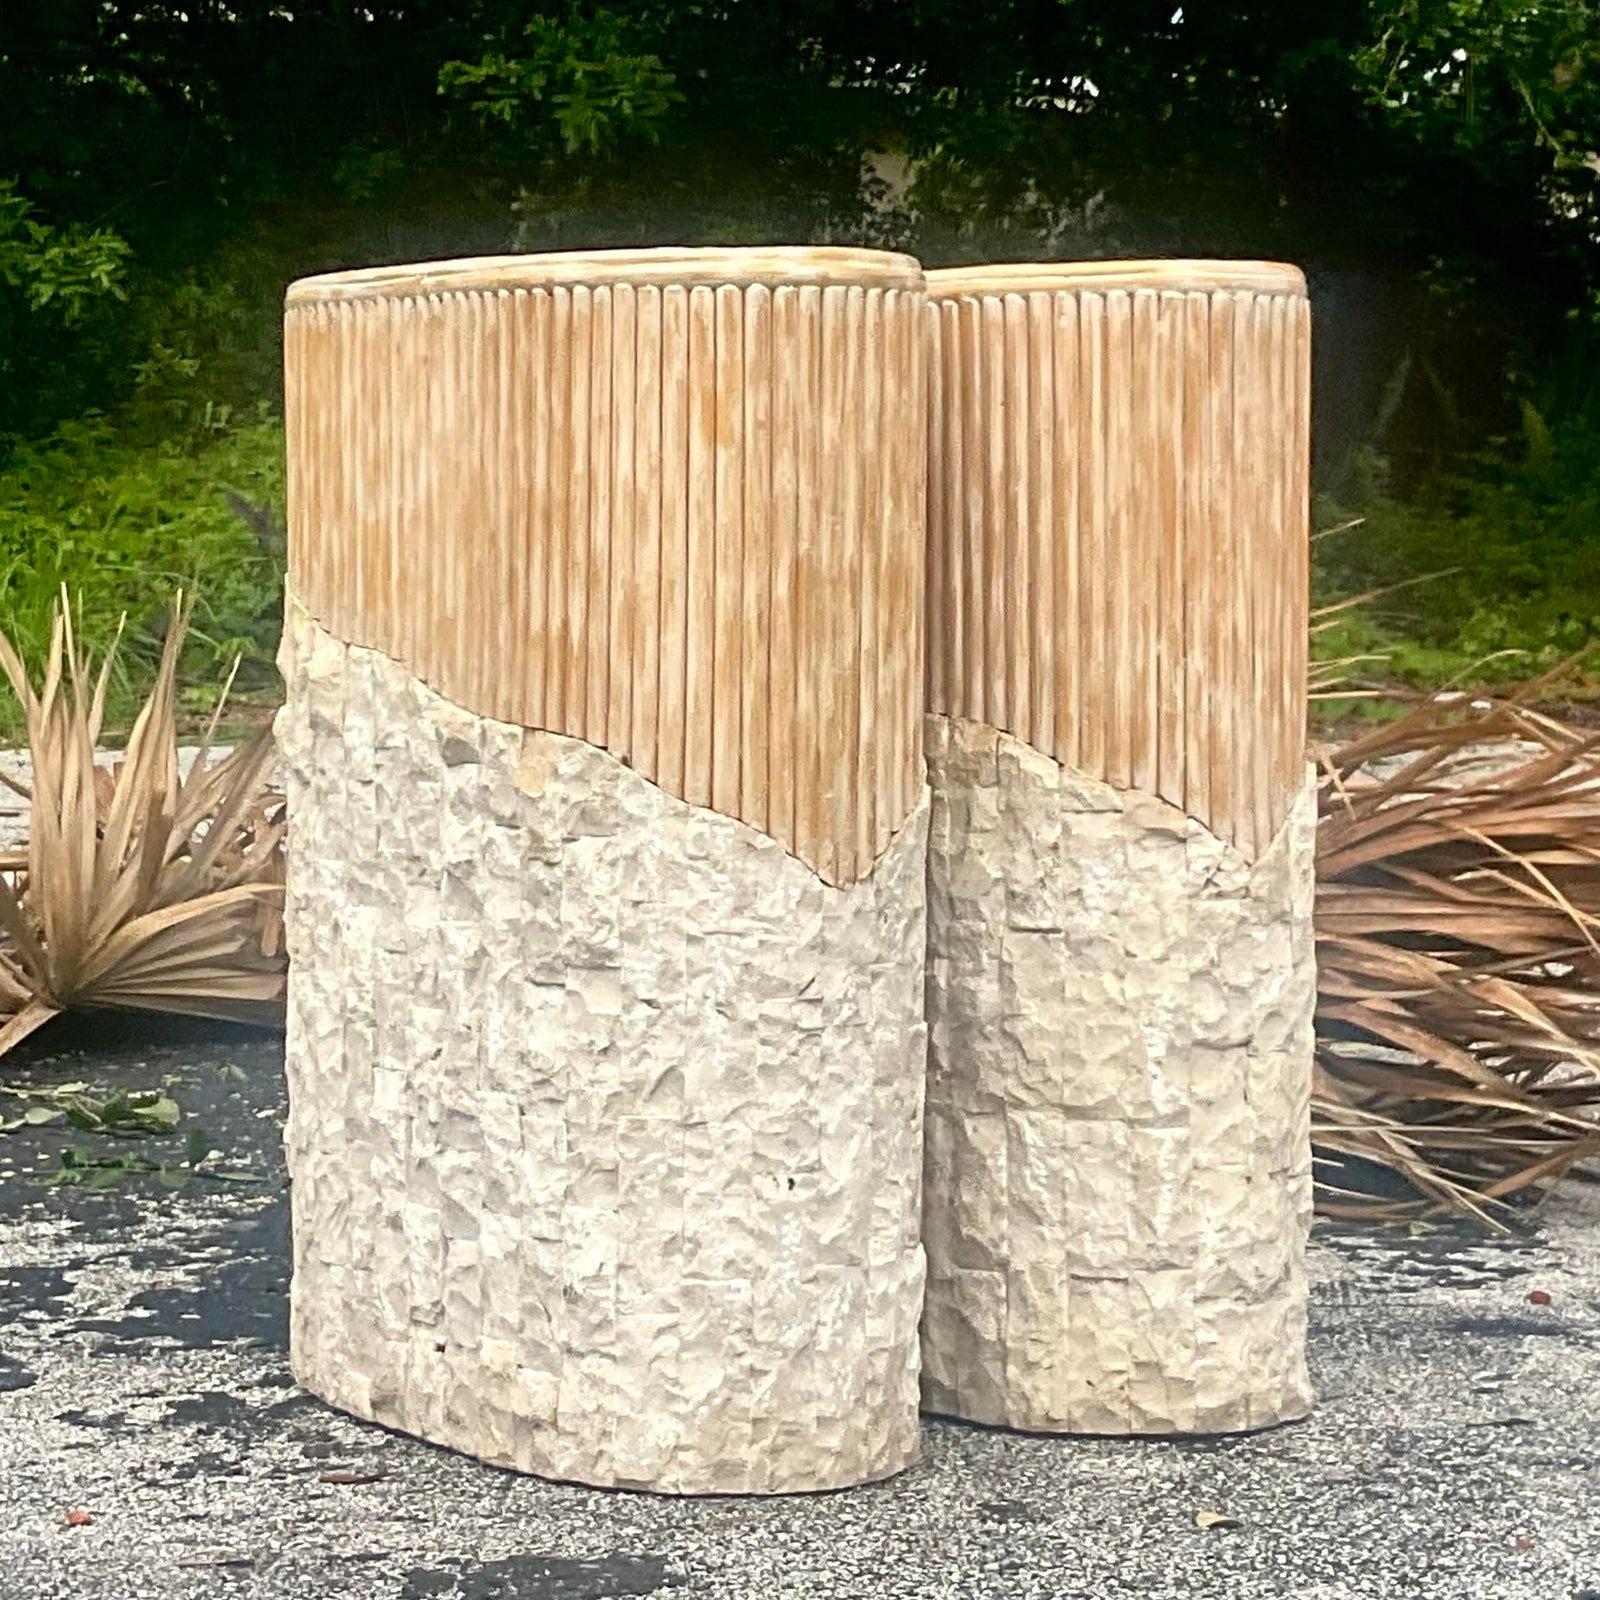 A stunning pair of vintage Boho dining table pedestals. Chic cerused reed with a wrap of tessellated stone. Perfect as a dining table or desk. You decide! Just add your glass and you are ready to go! Acquired from a Palm Beach estate

The pedestals